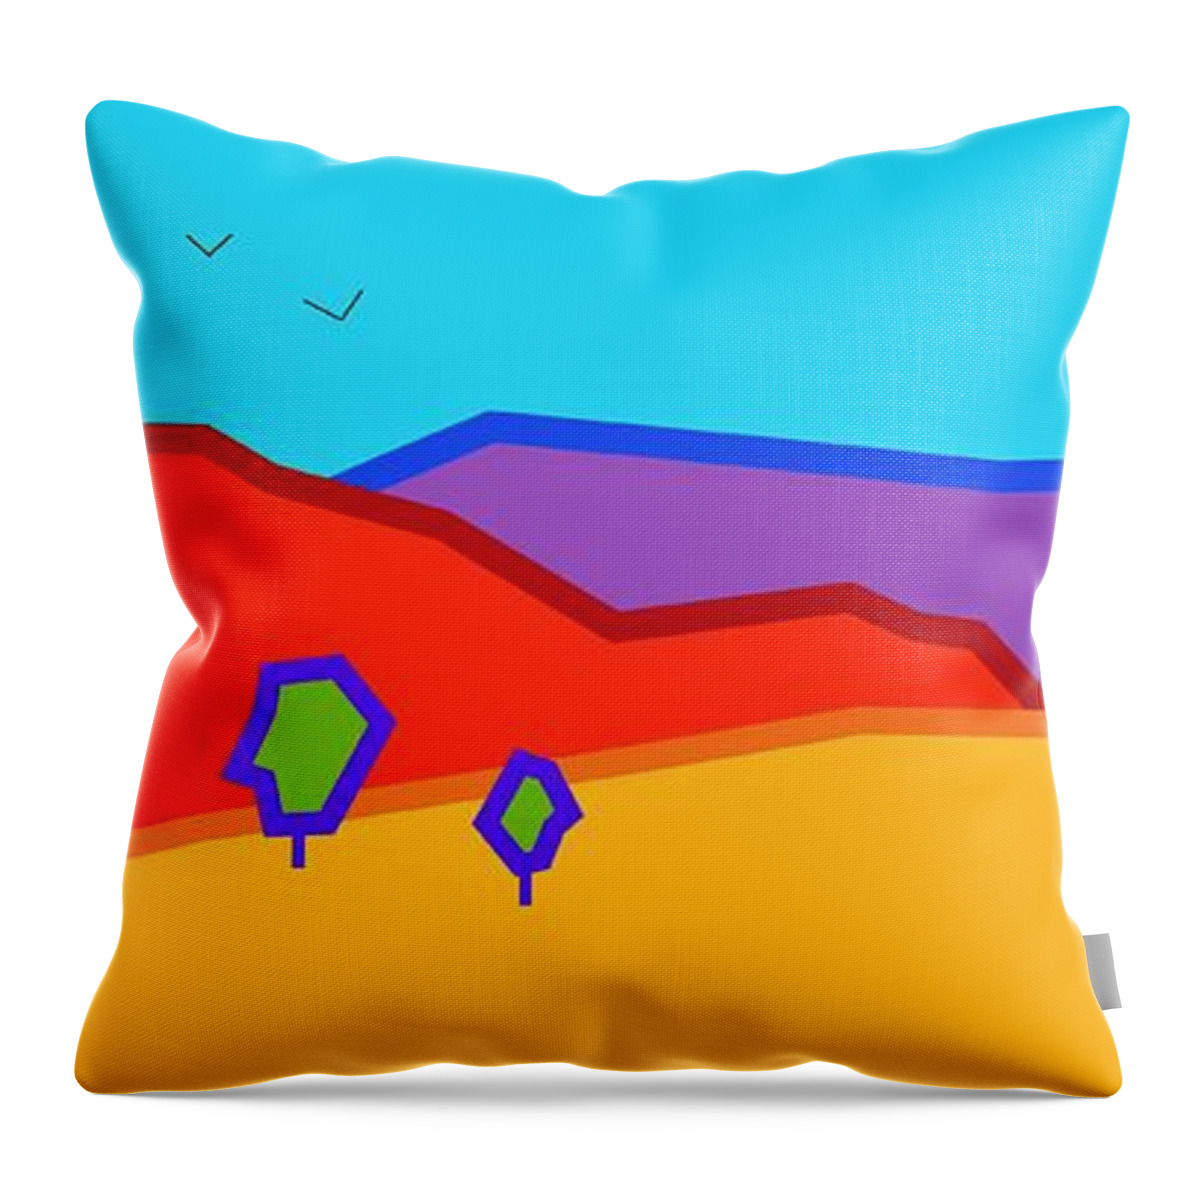 Hills Throw Pillow featuring the digital art Hills and crags by Fatline Graphic Art